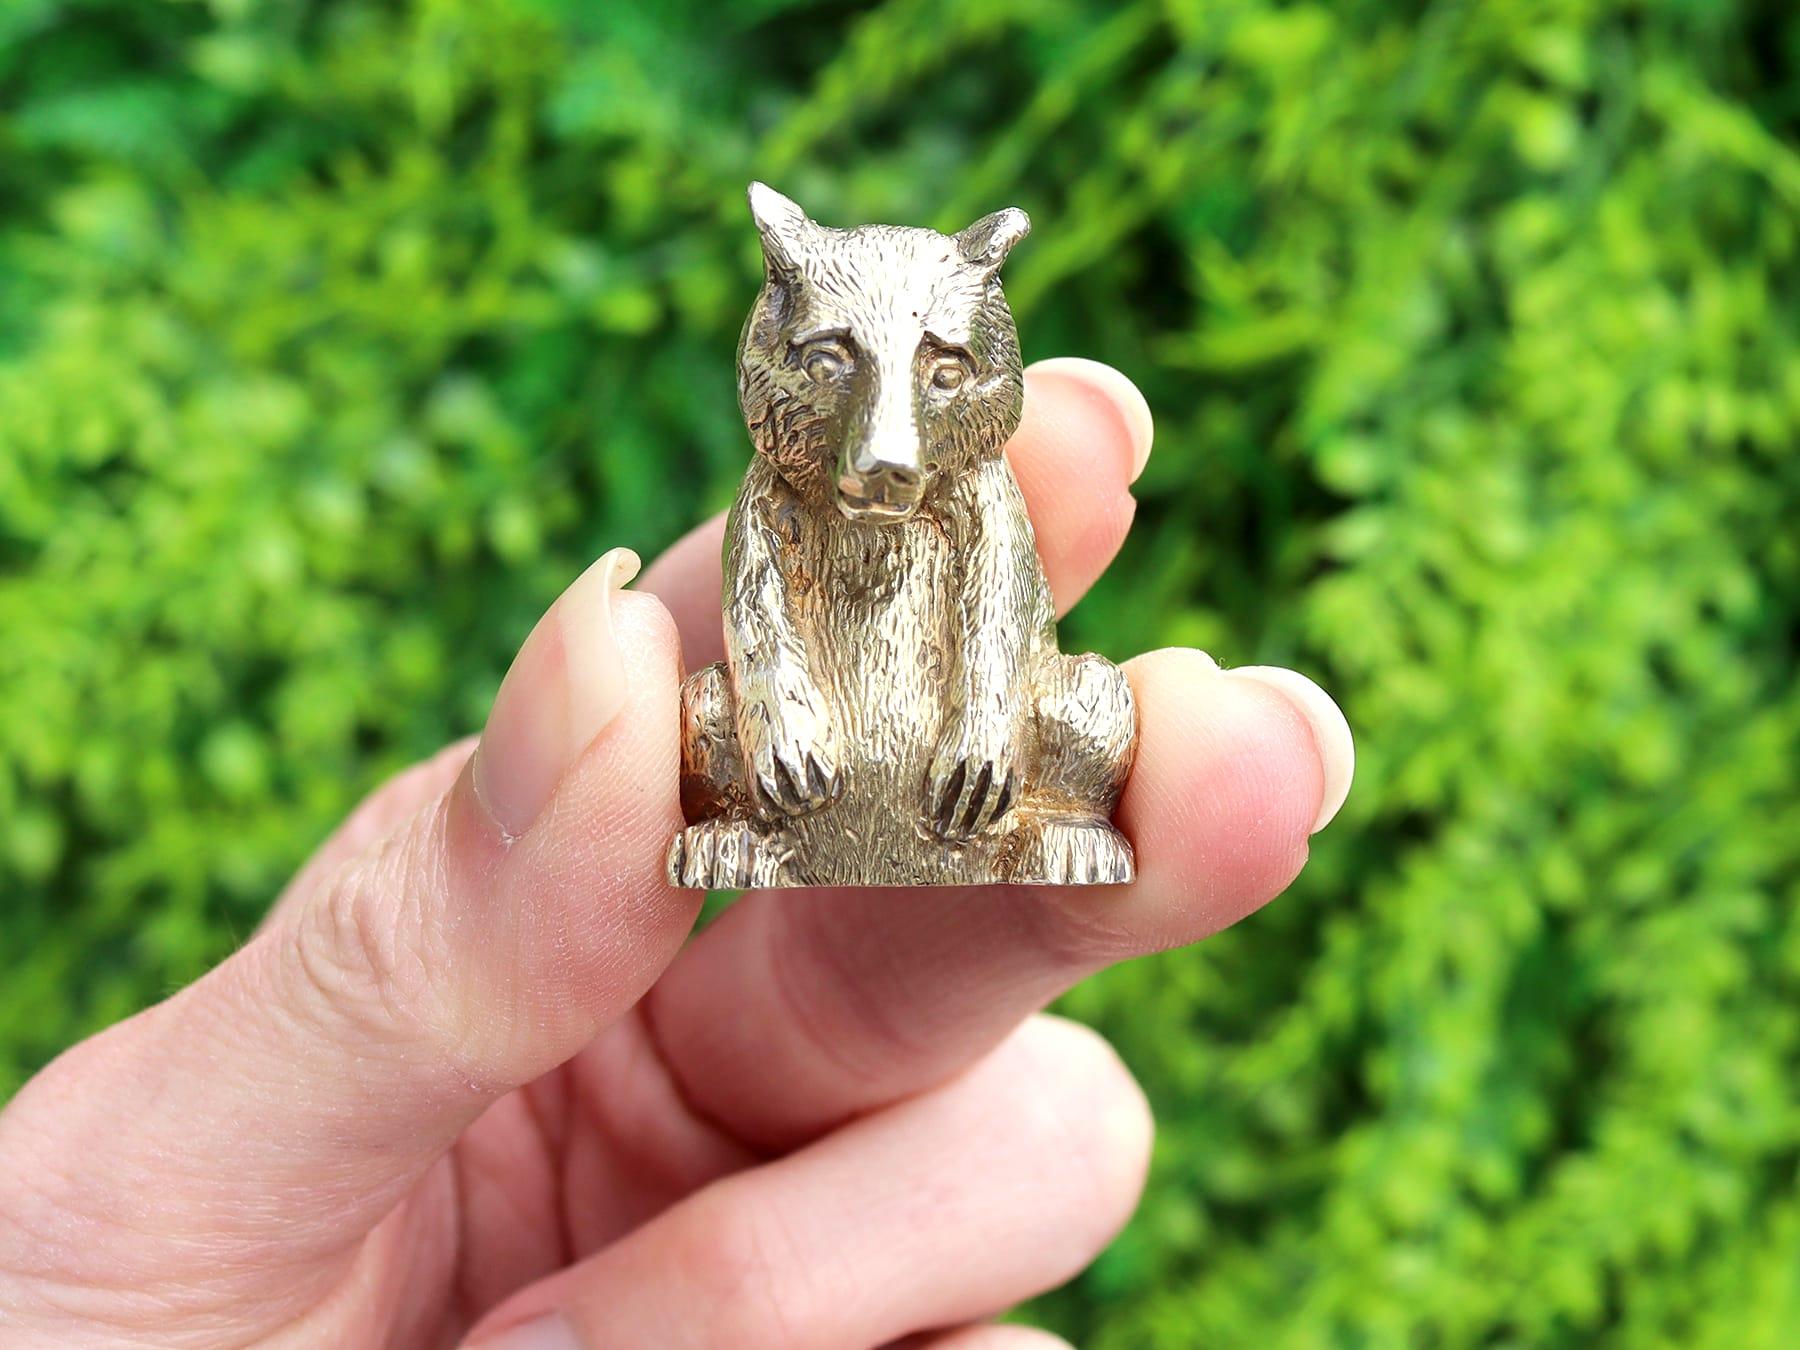 An exceptional, fine and impressive vintage English sterling silver model of a bear made by Stuart Devlin; part of our animal related silverware collection.

This exceptional, fine and impressive vintage silver ornament has been realistically